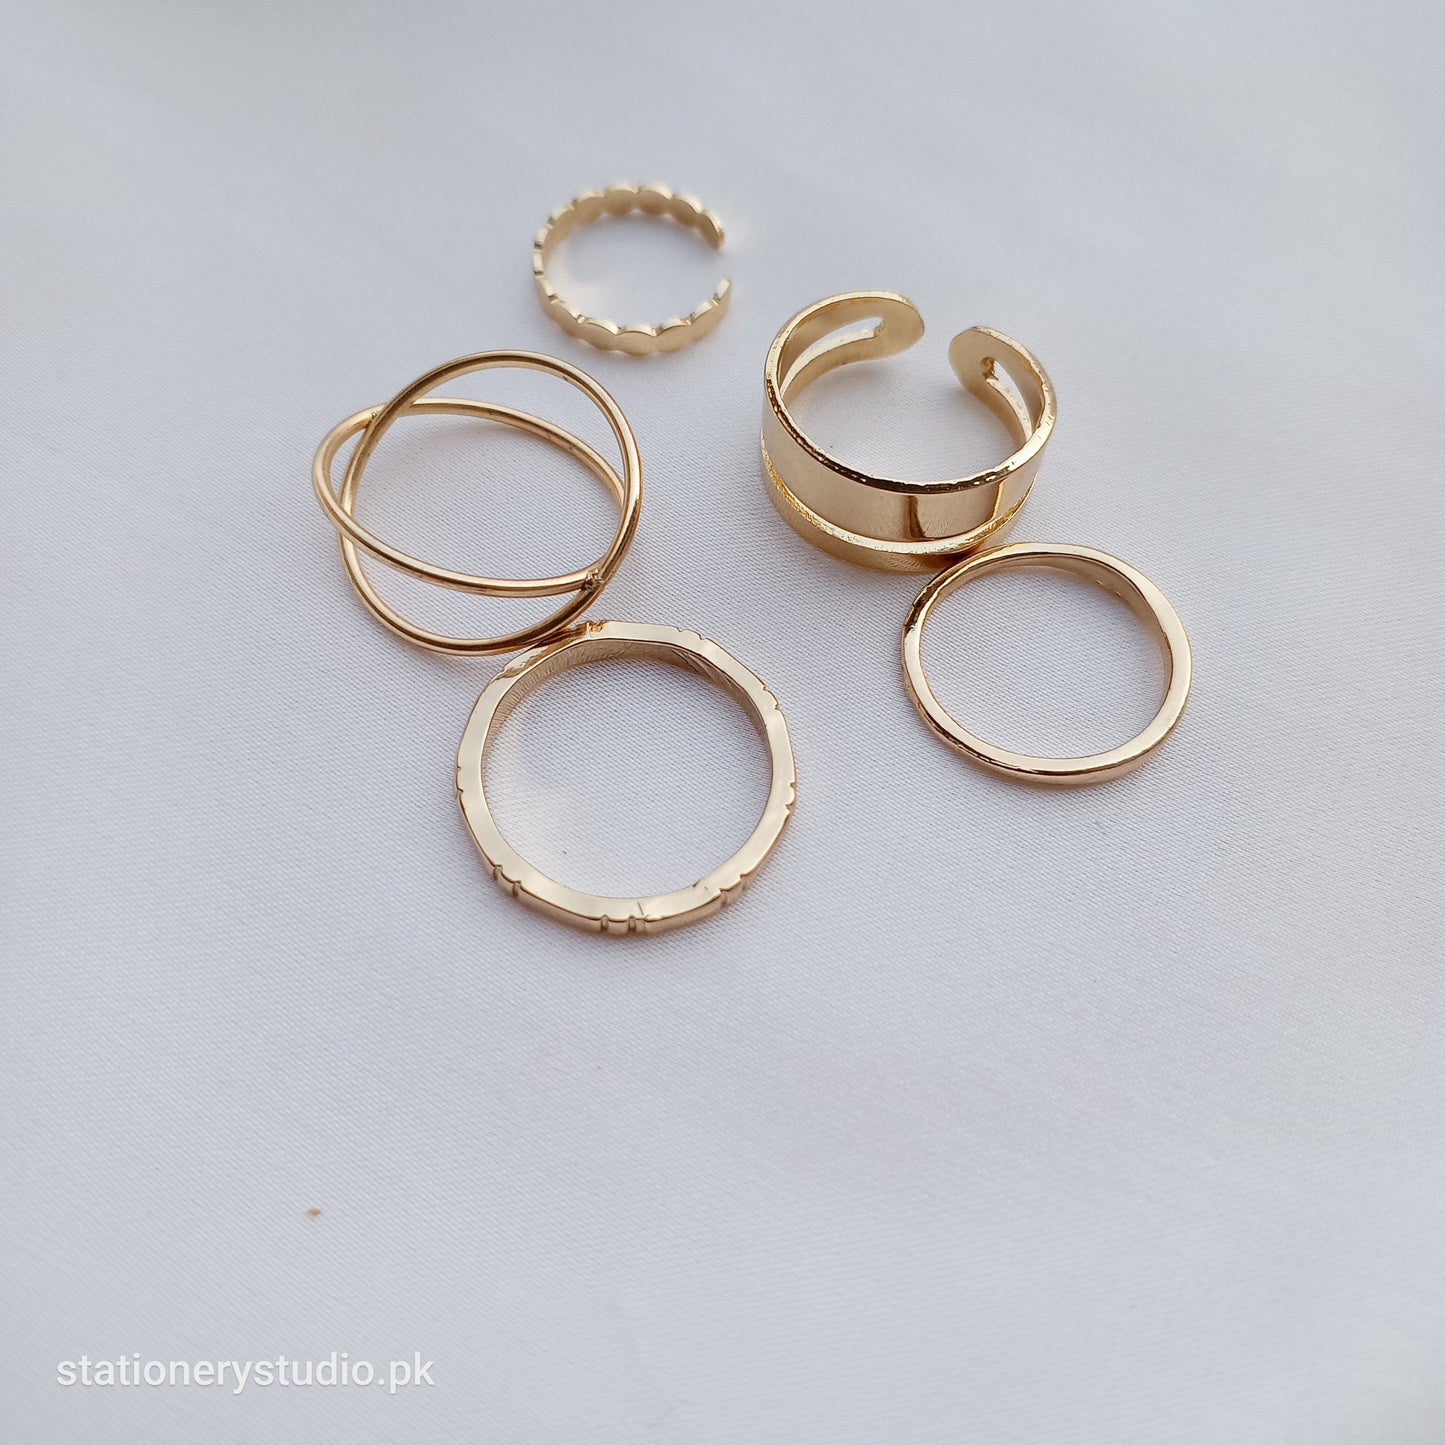 GOLD - RINGS SET OF 5 (STYLE 1)